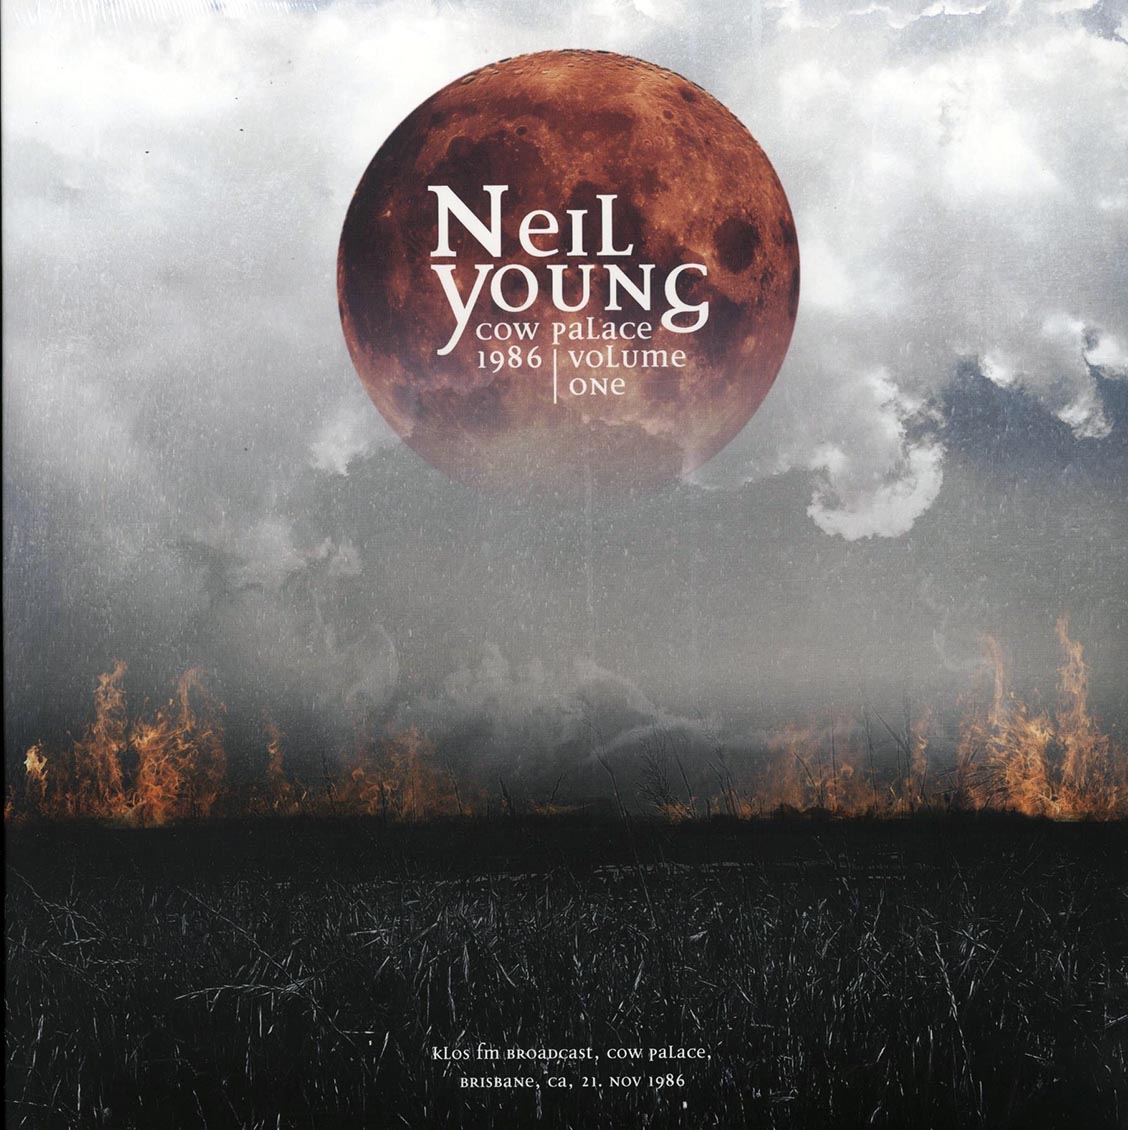 Neil Young - Cow Palace 1986 Volume 1